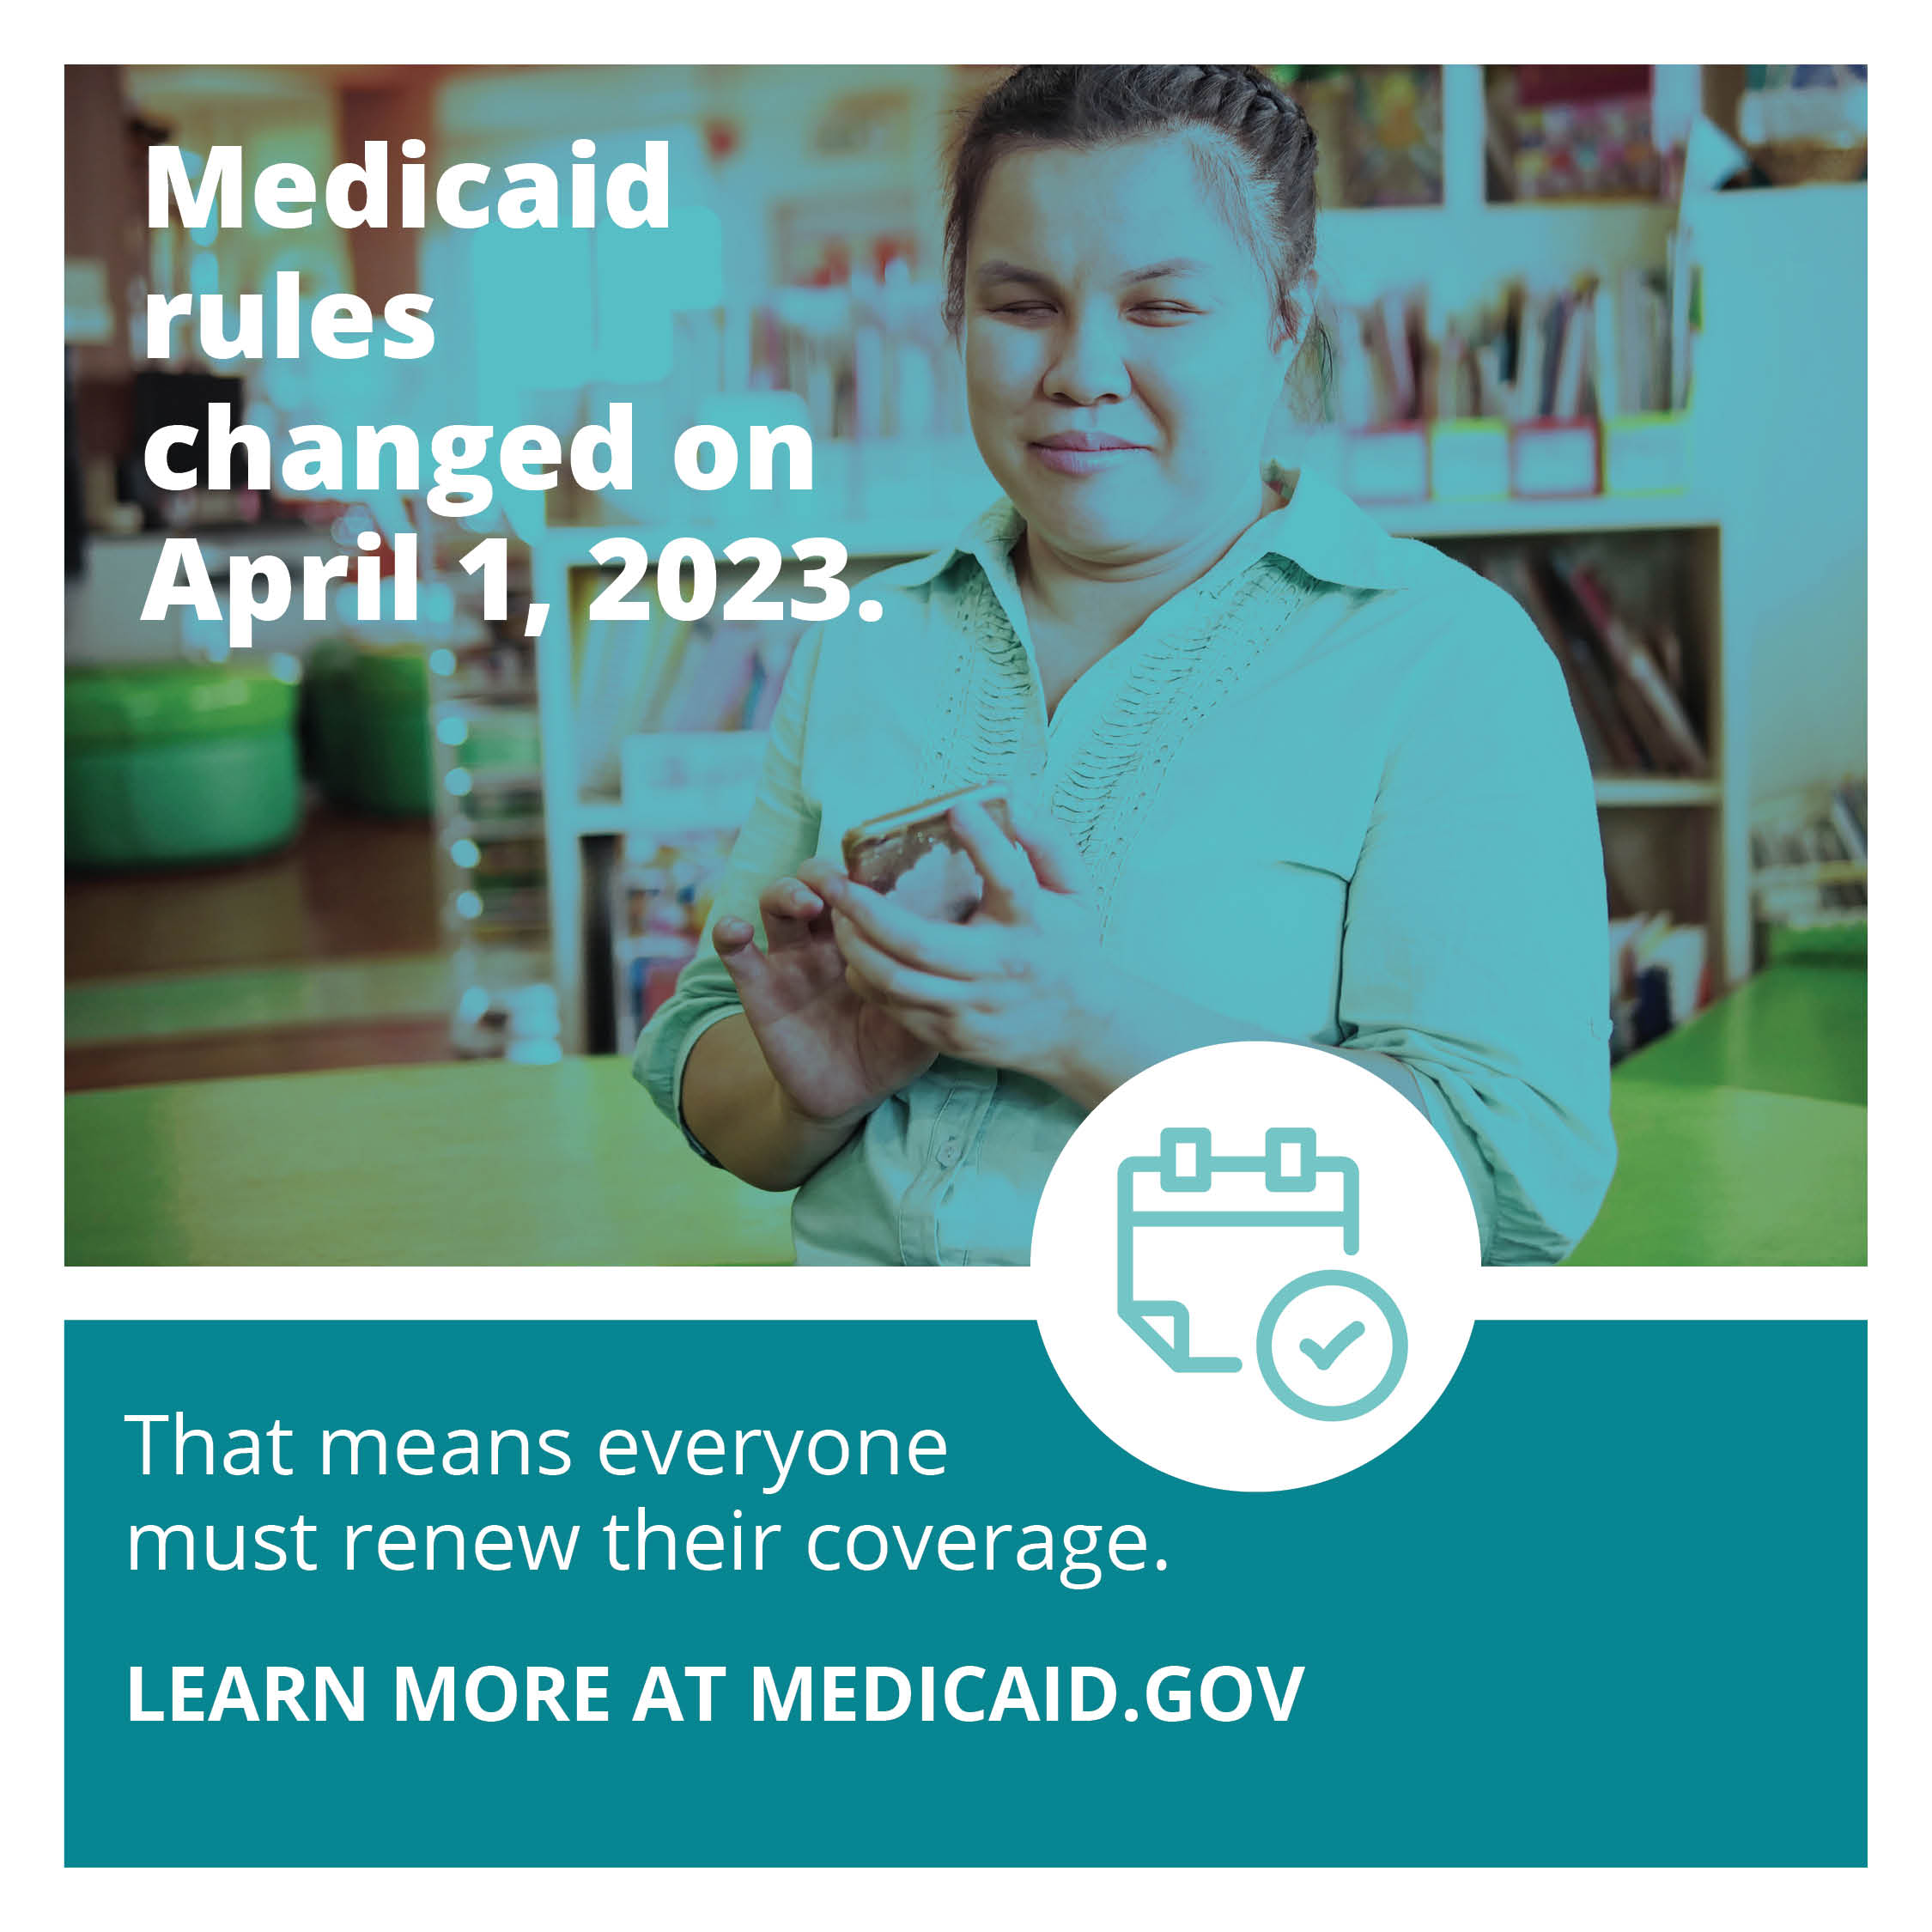 A photo of a blind woman using her smart phone with the message Medicaid rules changed on April 1, 2023. That means everyone must renew their coverage. Learn more at Medicaid.gov.